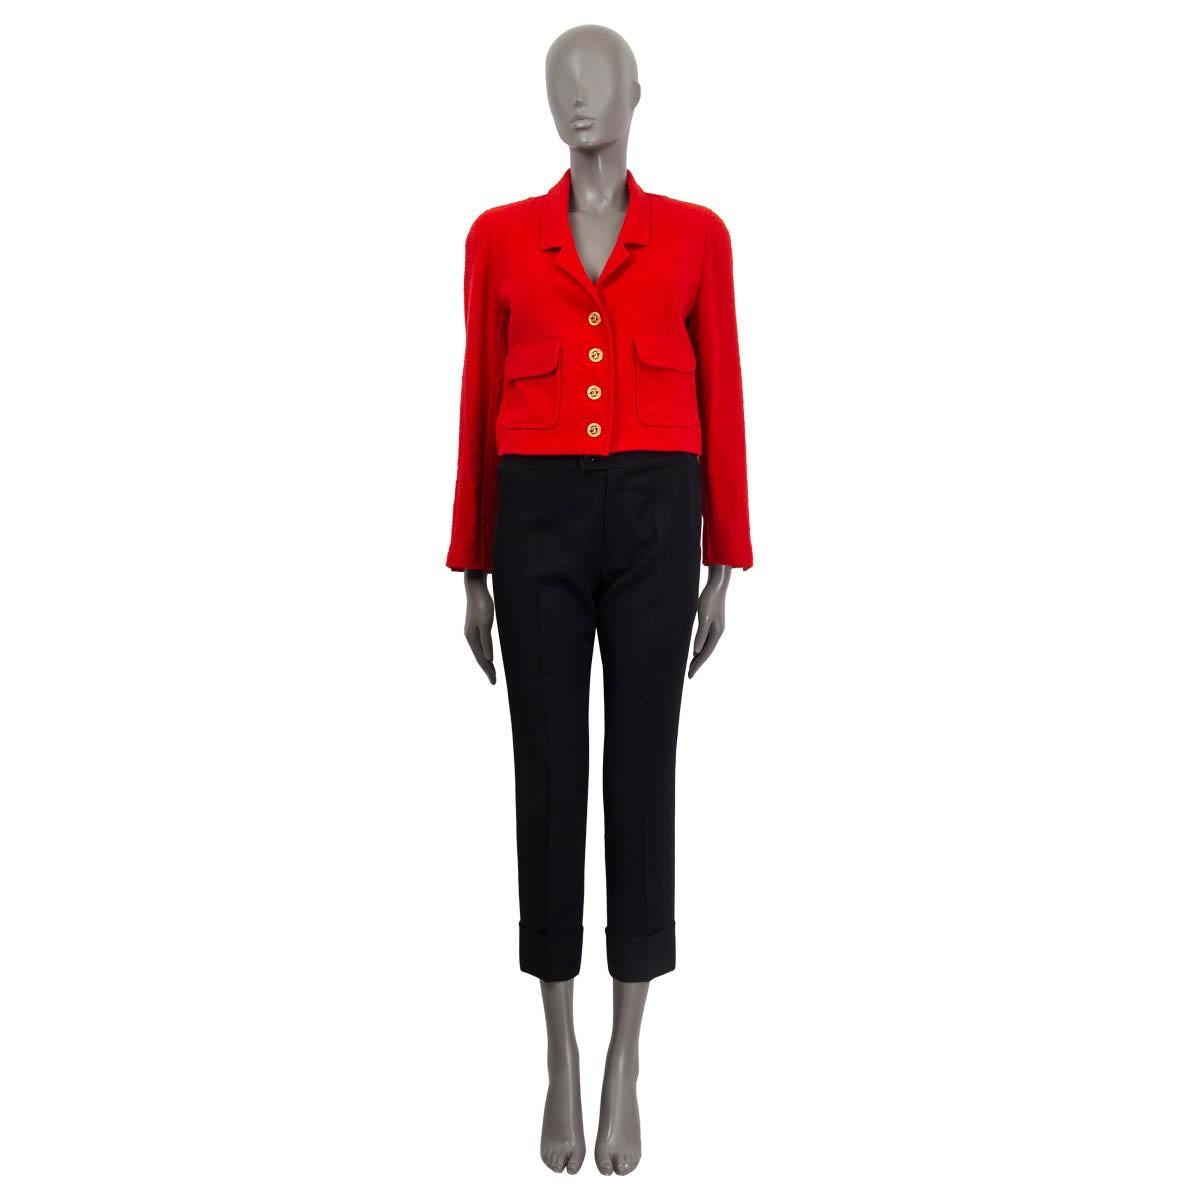 100% authentic Chanel cropped tweed blazer in red wool (assumed cause tag is missing). Features two patch pockets on the front and 'CC' buttoned cuffs. Opens with four golden 'CC' buttons on the front. Unlined. Has been worn and is in excellent